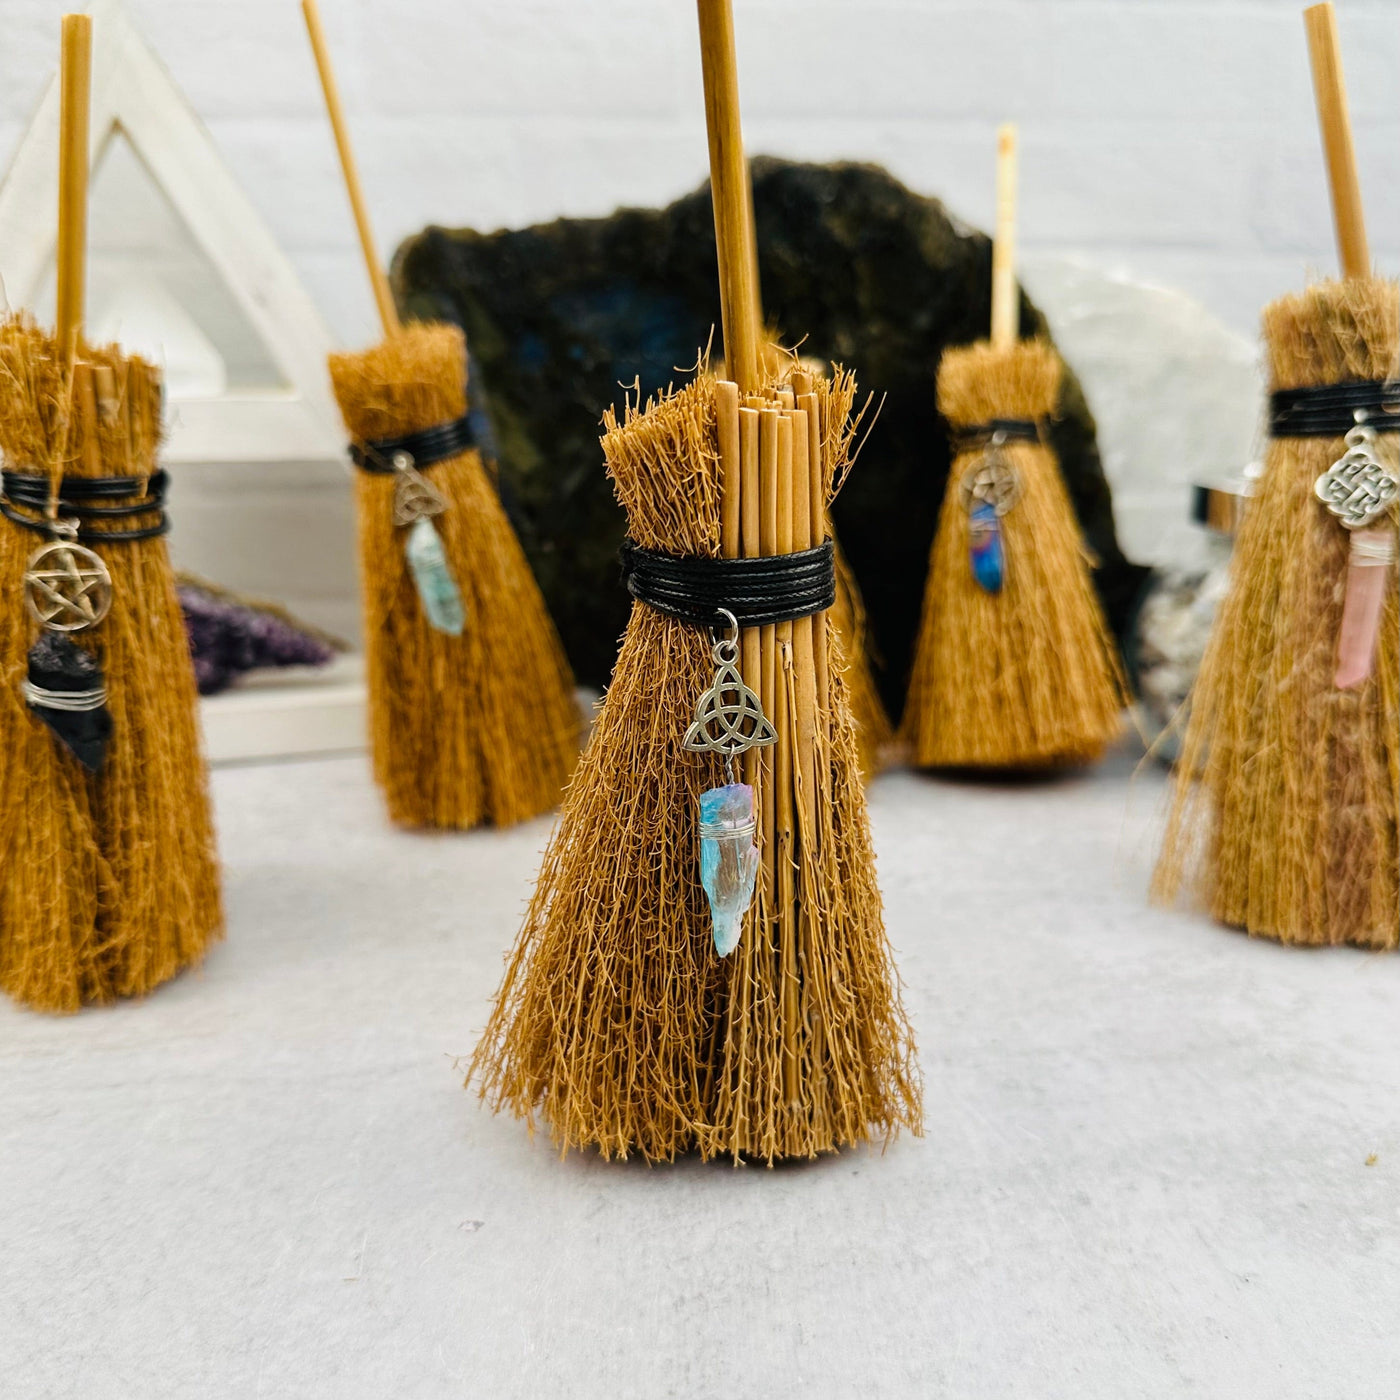 close up of the details on these brooms 